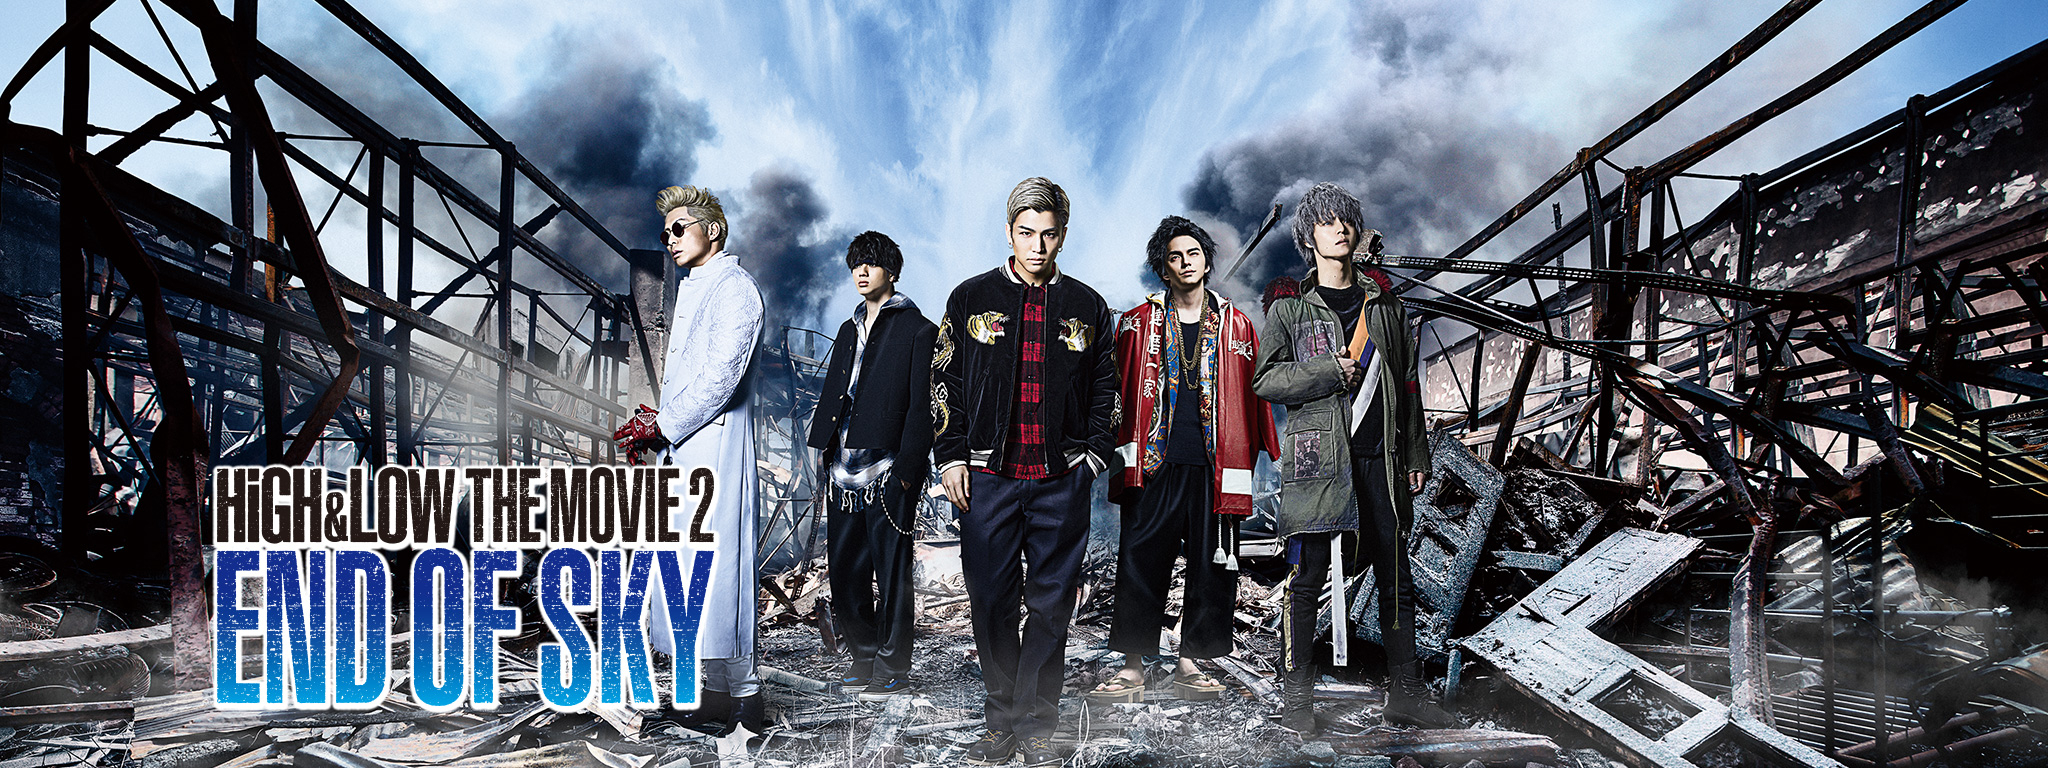 HiGH&LOW THE MOVIE2 / END OF SKY が見放題！ | Hulu(フールー)